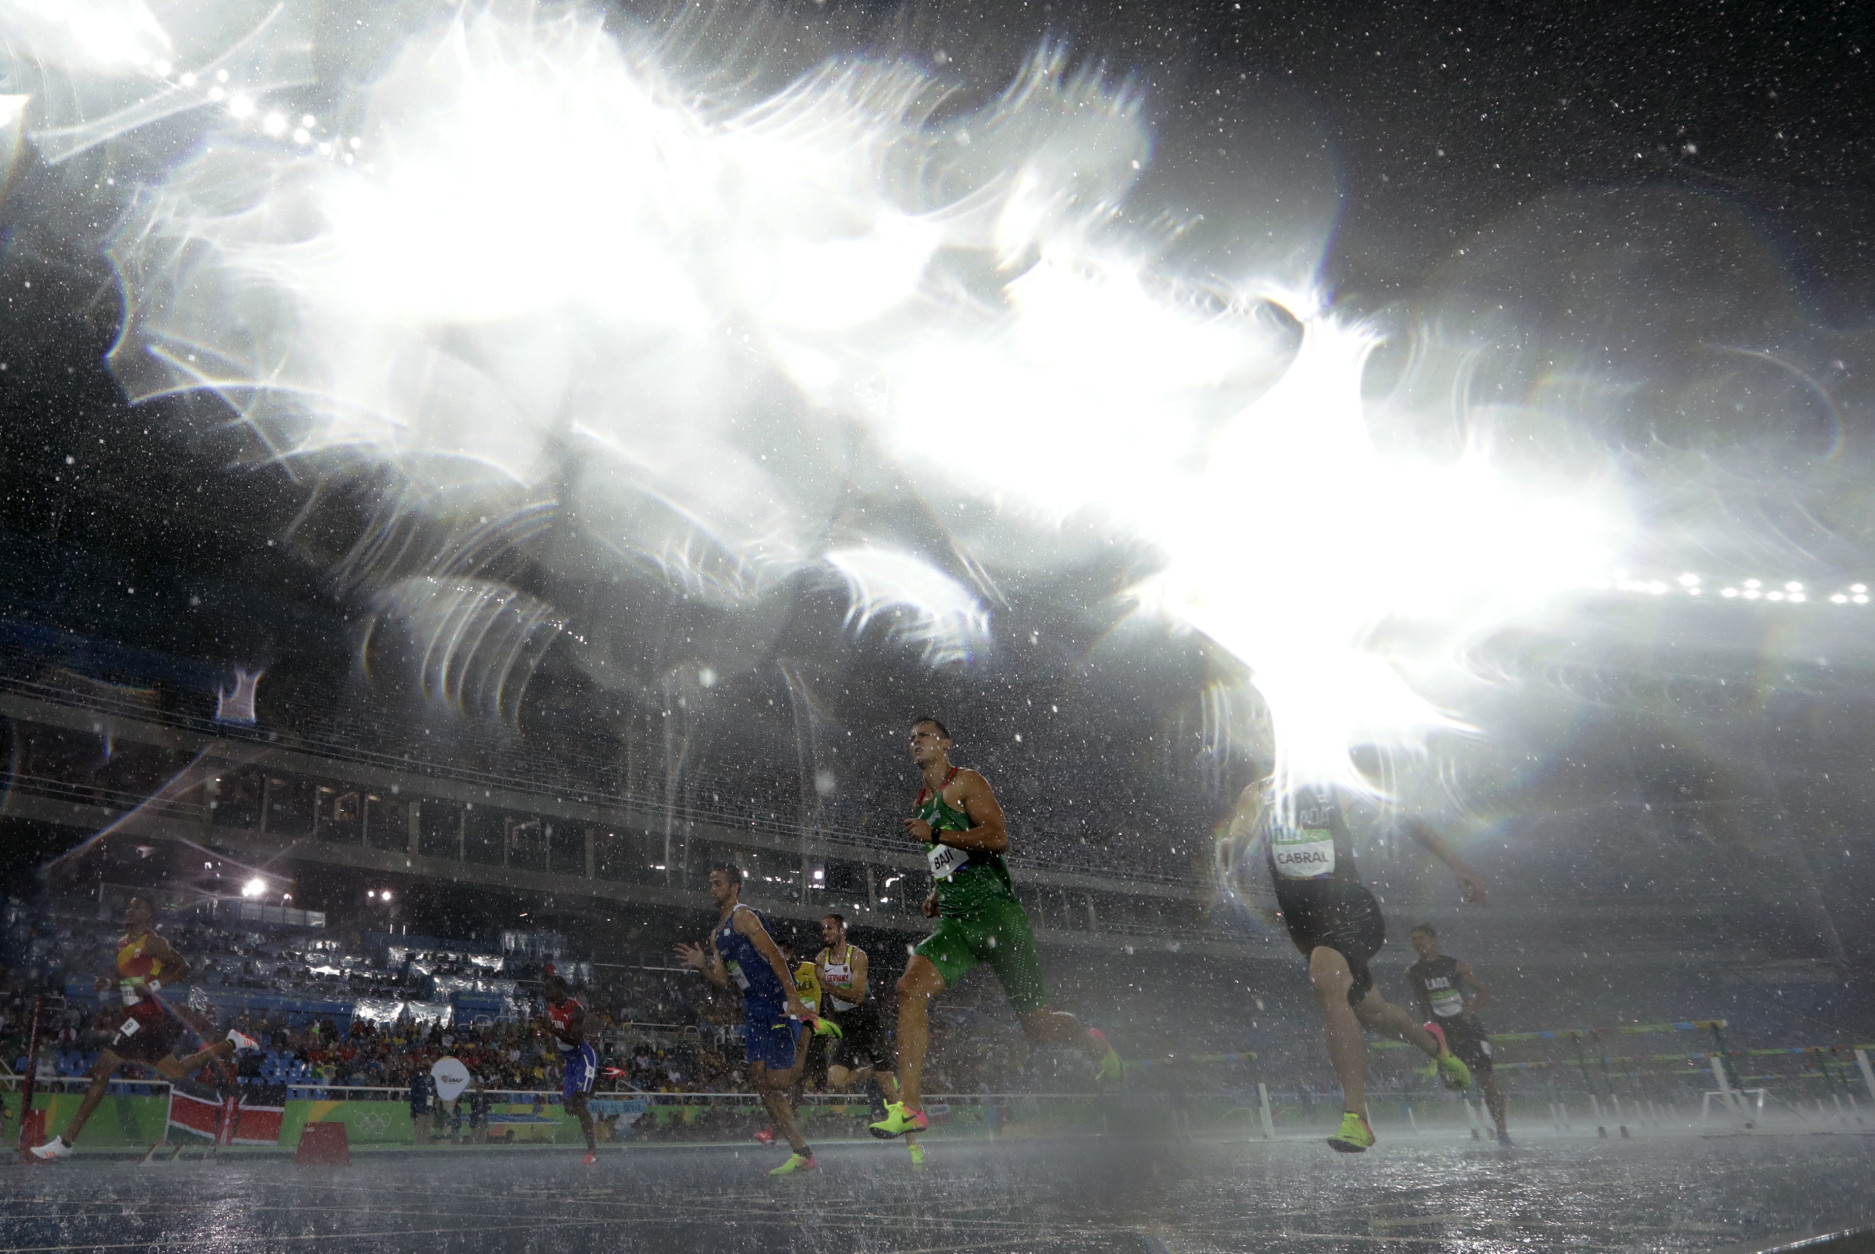 Hungary's Balazs Baji, center, and Canada's Johnathan Cabral compete in a men's 110-meter hurdles heat during heavy rain at the athletics competitions of the 2016 Summer Olympics at the Olympic stadium in Rio de Janeiro, Brazil, Monday, Aug. 15, 2016. (AP Photo/Matt Slocum)